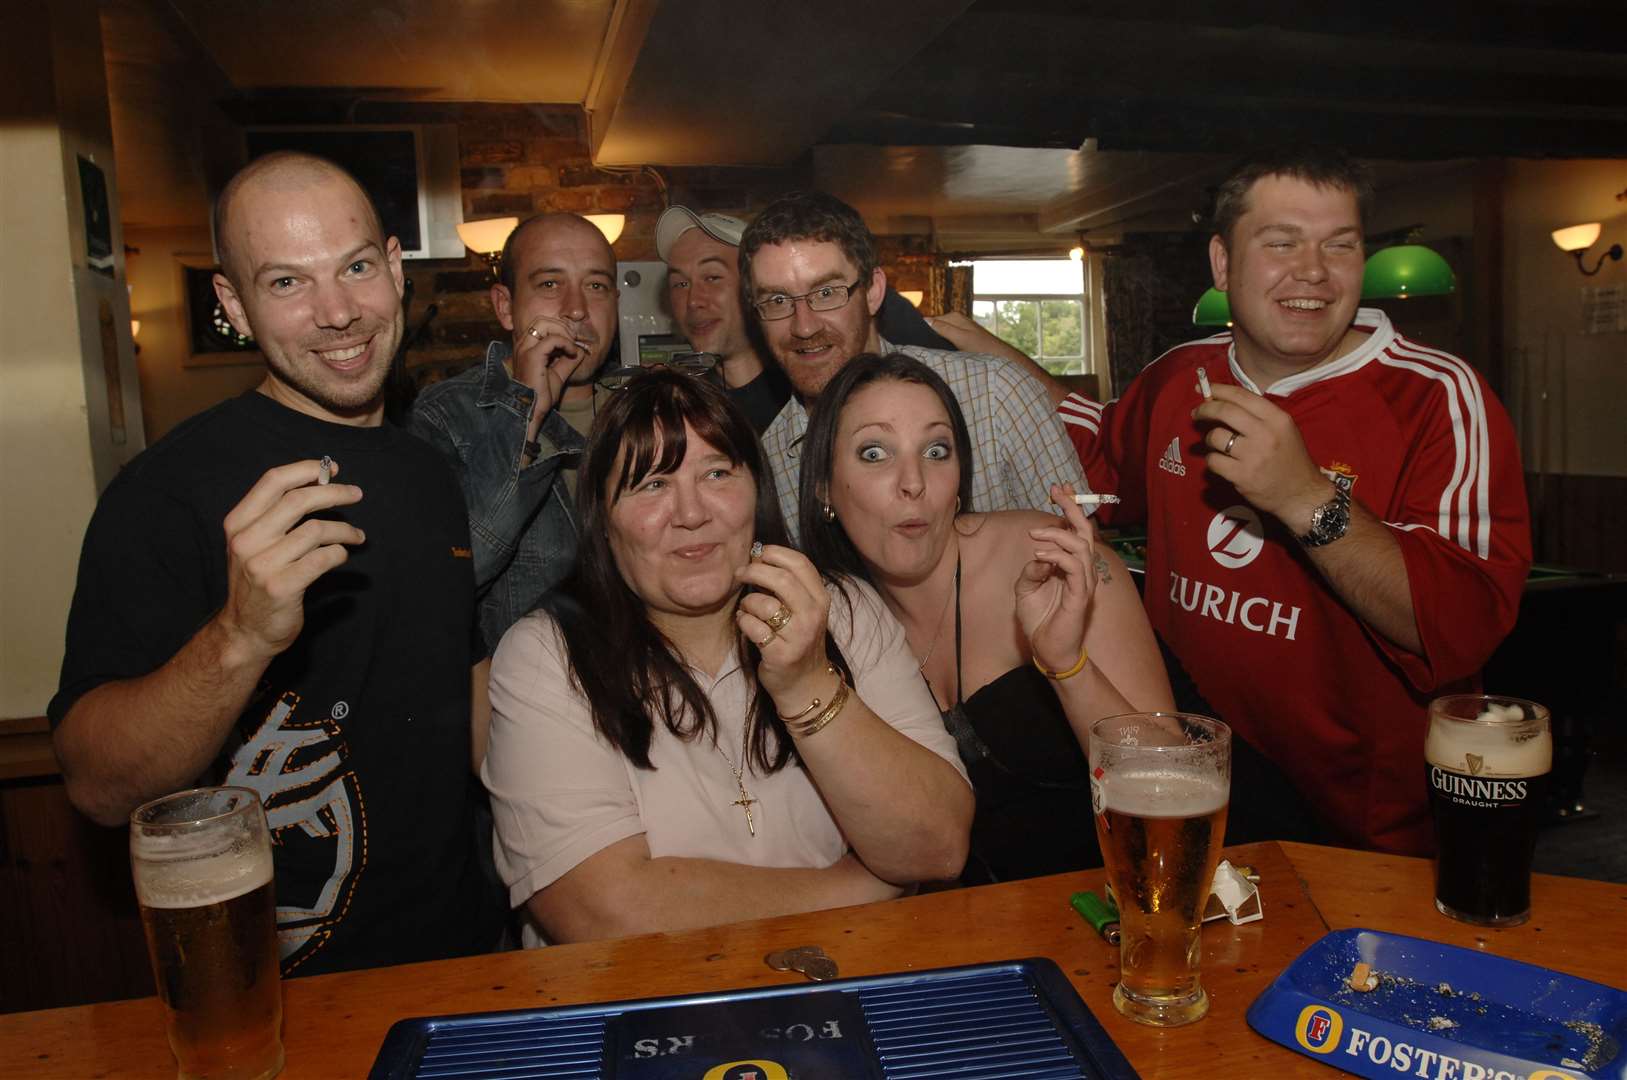 Punters at Ye Old Leather Bottle in Dover Road, Northfleet, on June 30, 2007, making the most of the last day before the smoking ban in pubs. The pub, which dates back to 1734, is still going today. Picture: Nick Johnson